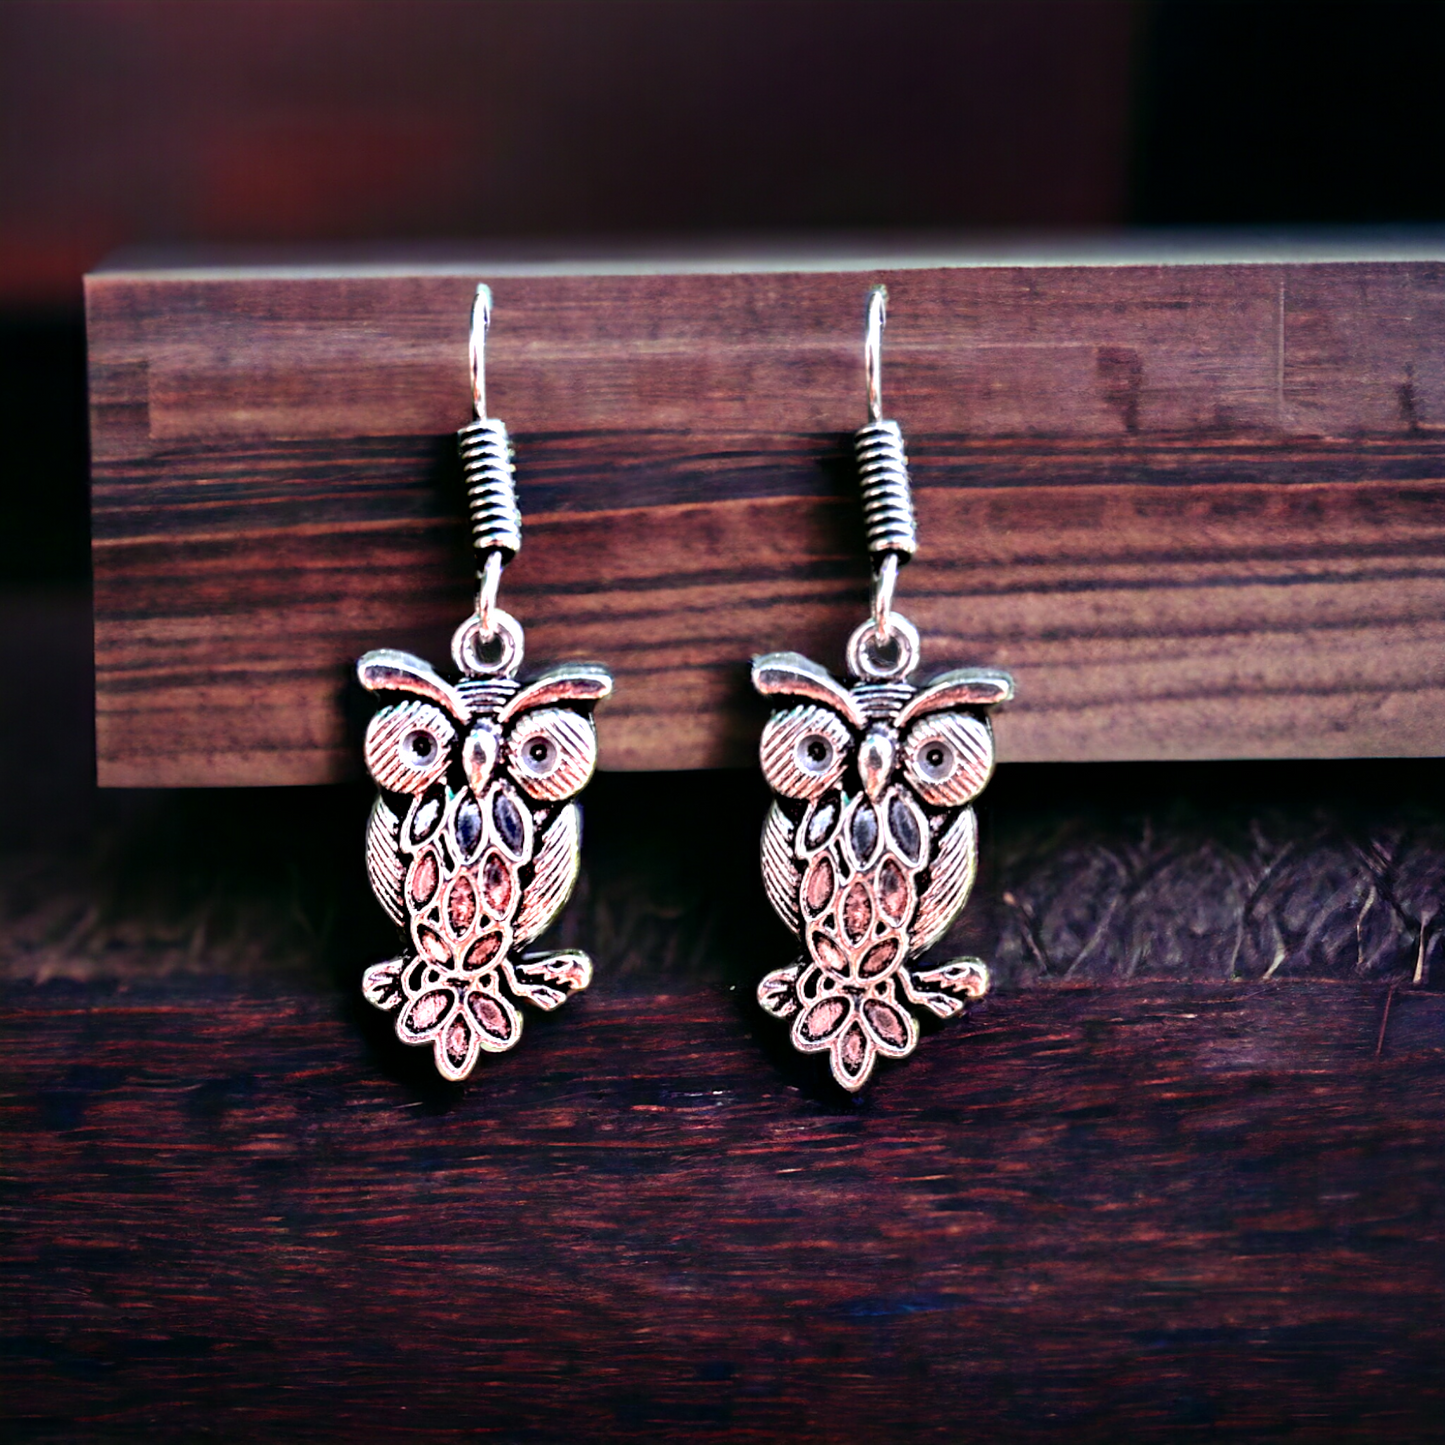 "Vyoma Small Owl Earring – Quirky Elegance, Affordable Whimsy